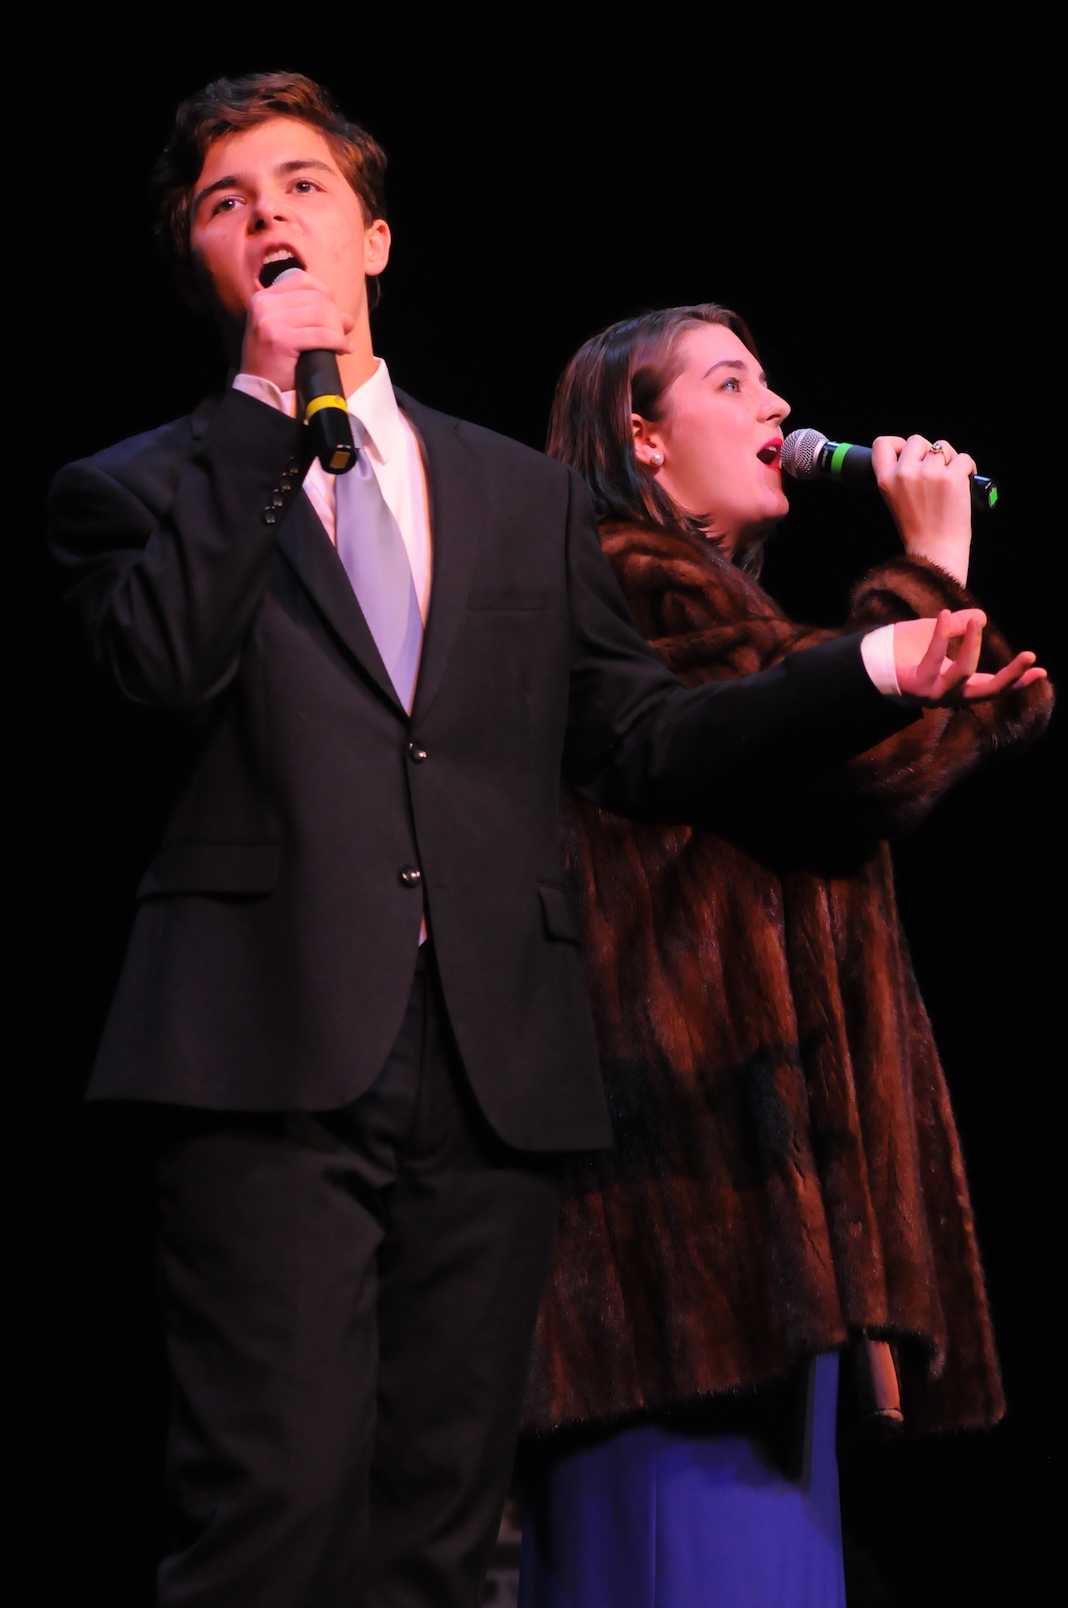 Lawson Marchetti and Madeline Porter singing "Baby It's Cold Outside" by Frank Loesser. Photo courtesy of Hubert Worley Photography.